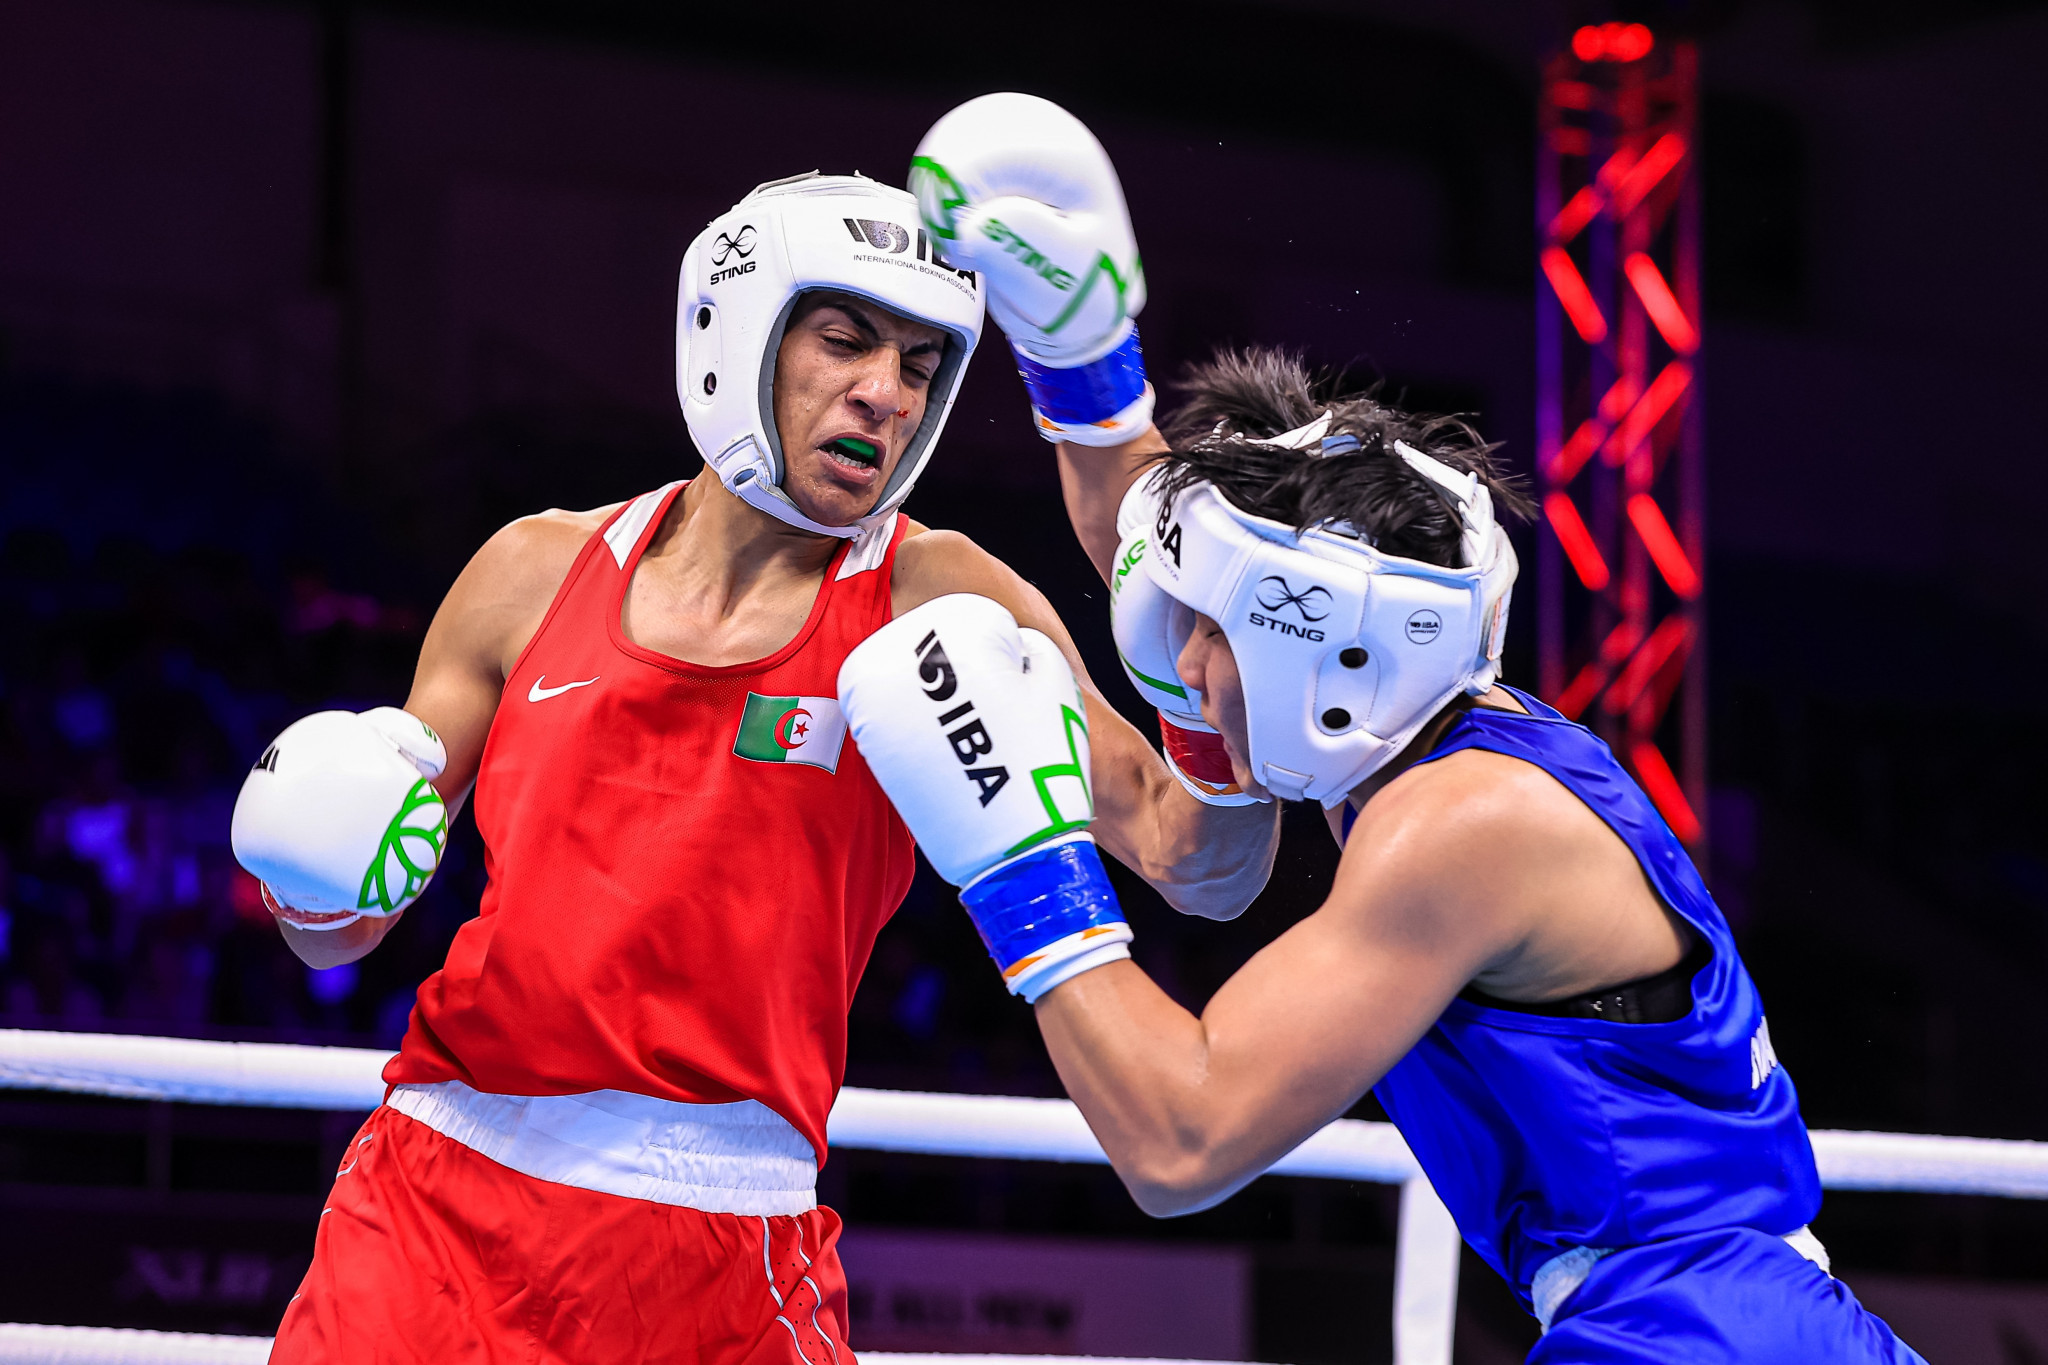 Ajay Singh, President of the Boxing Federation of India, became vice-president of the IBA at the recently concluded Women's World Championships in New Delhi ©Getty Images